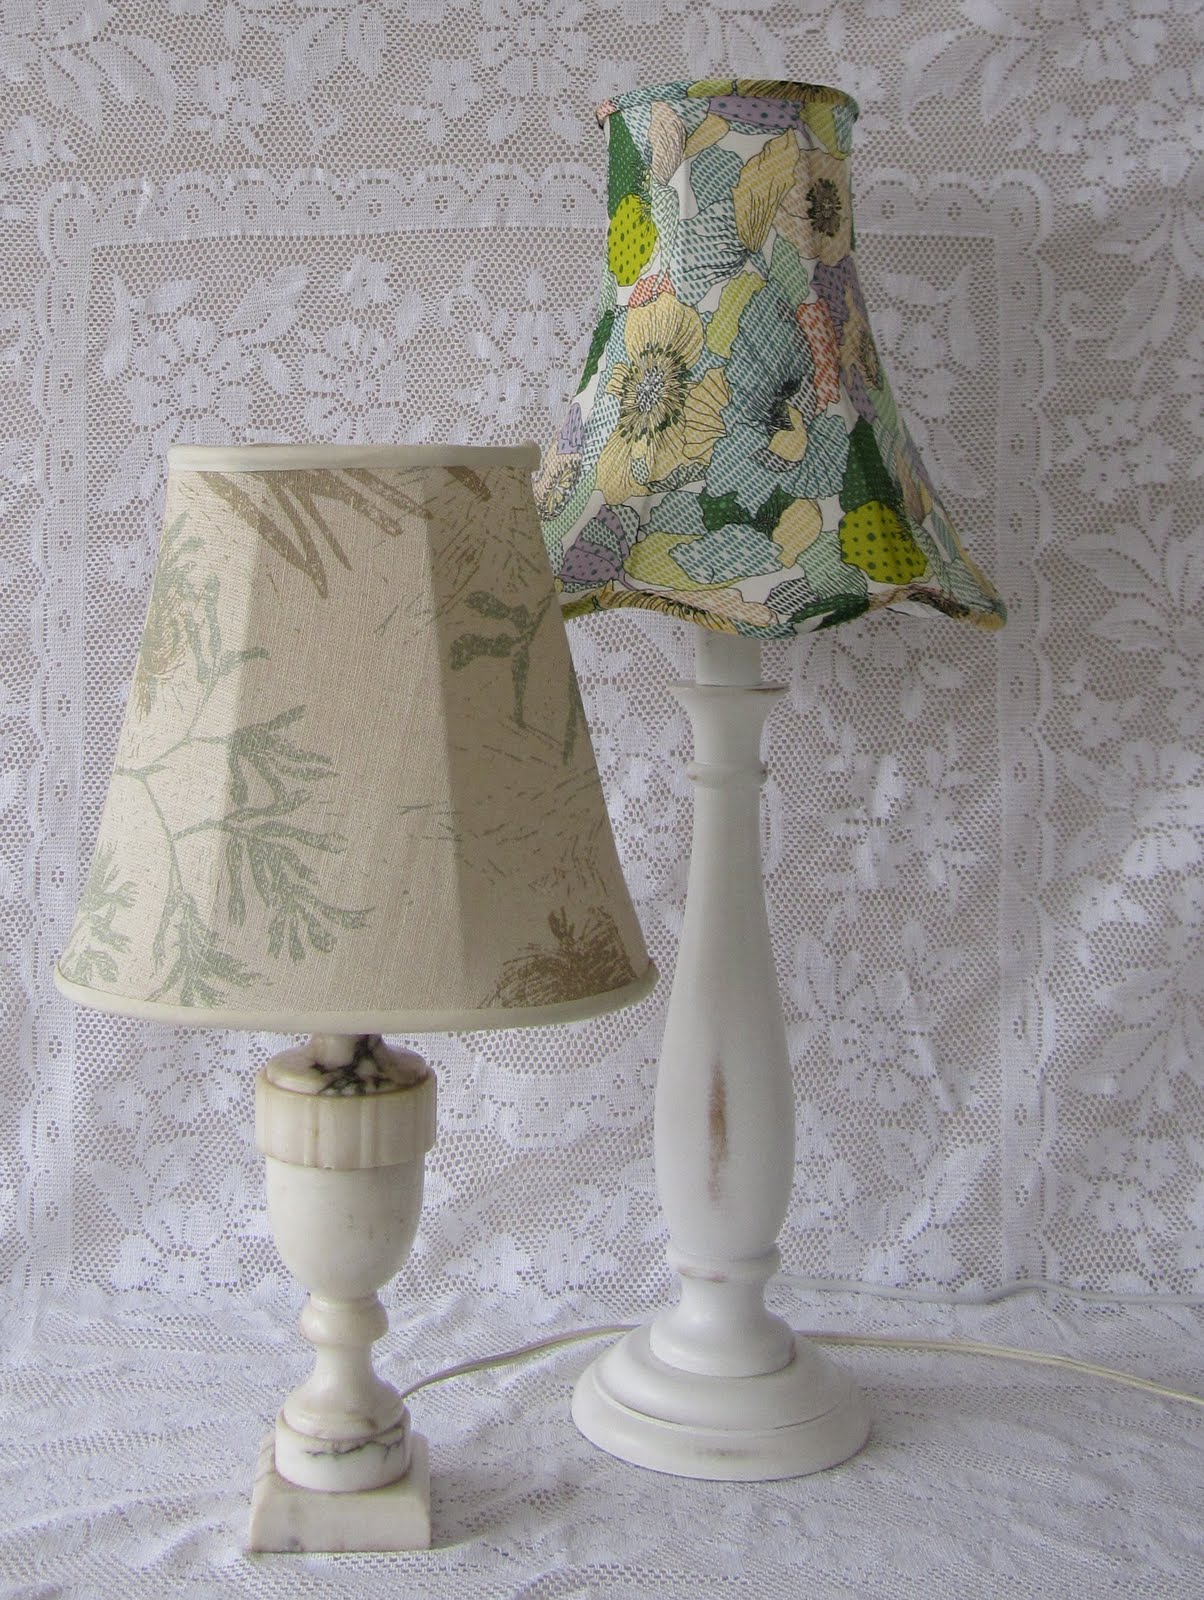 Recover A Lampshade Tutorial, How To Cover A Lampshade Frame